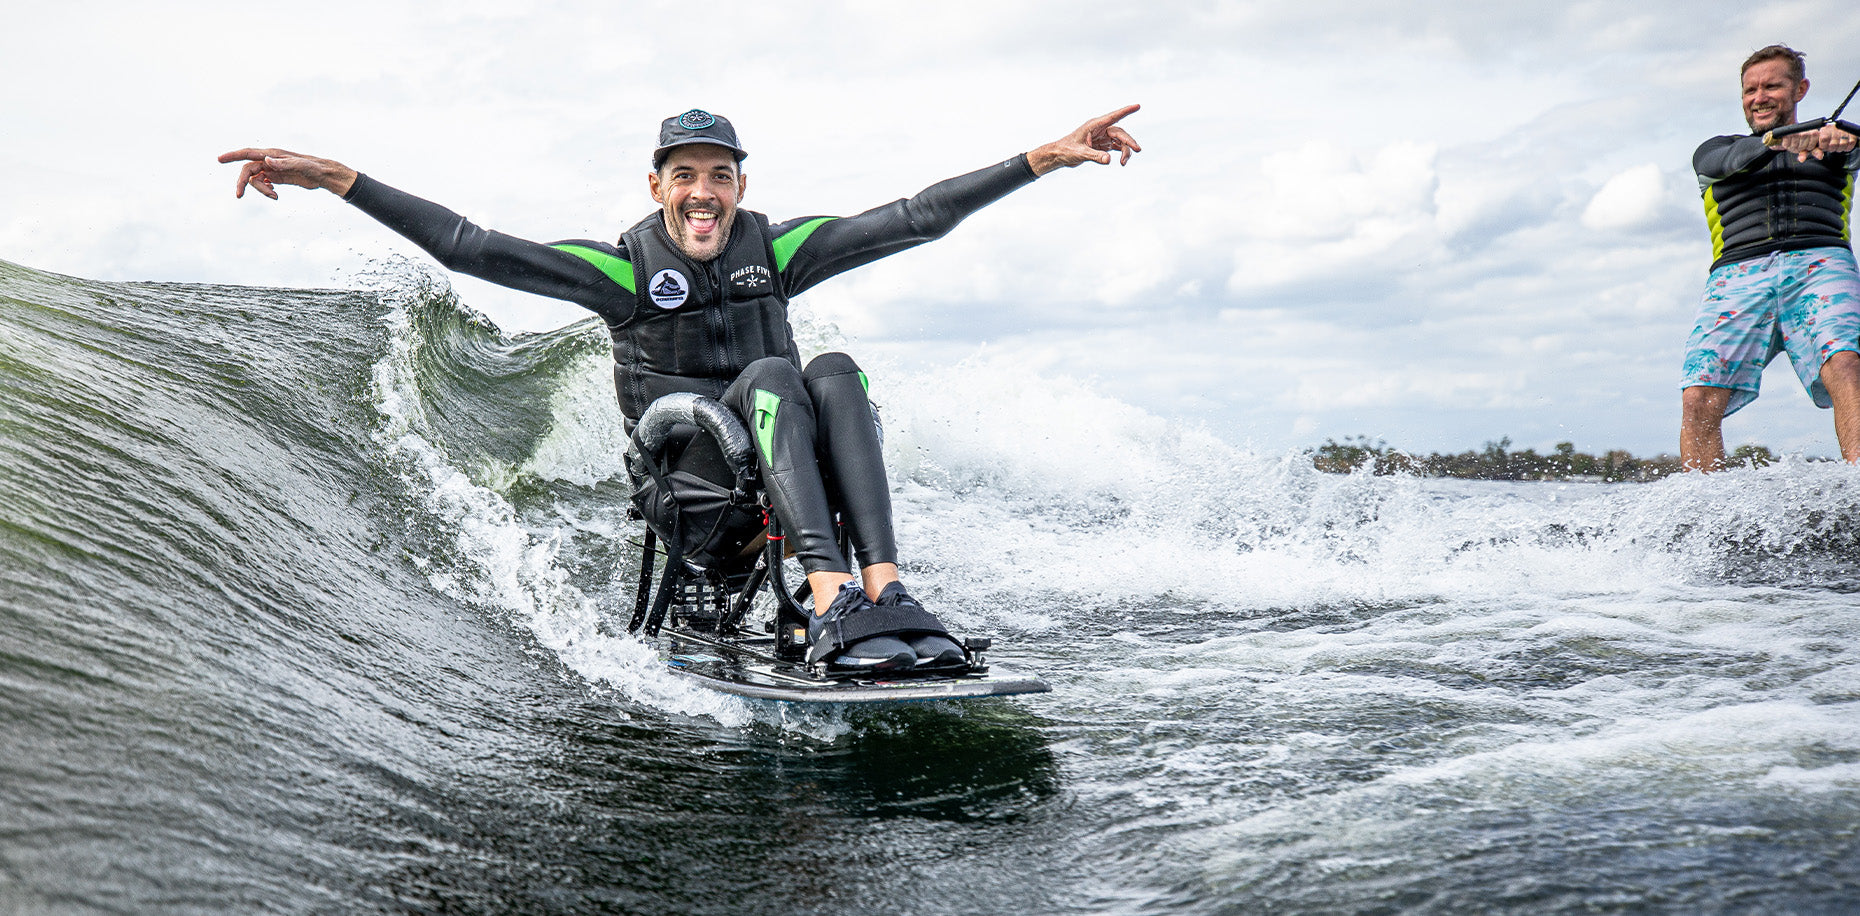 Inclusion Matters with The Cage Surfer